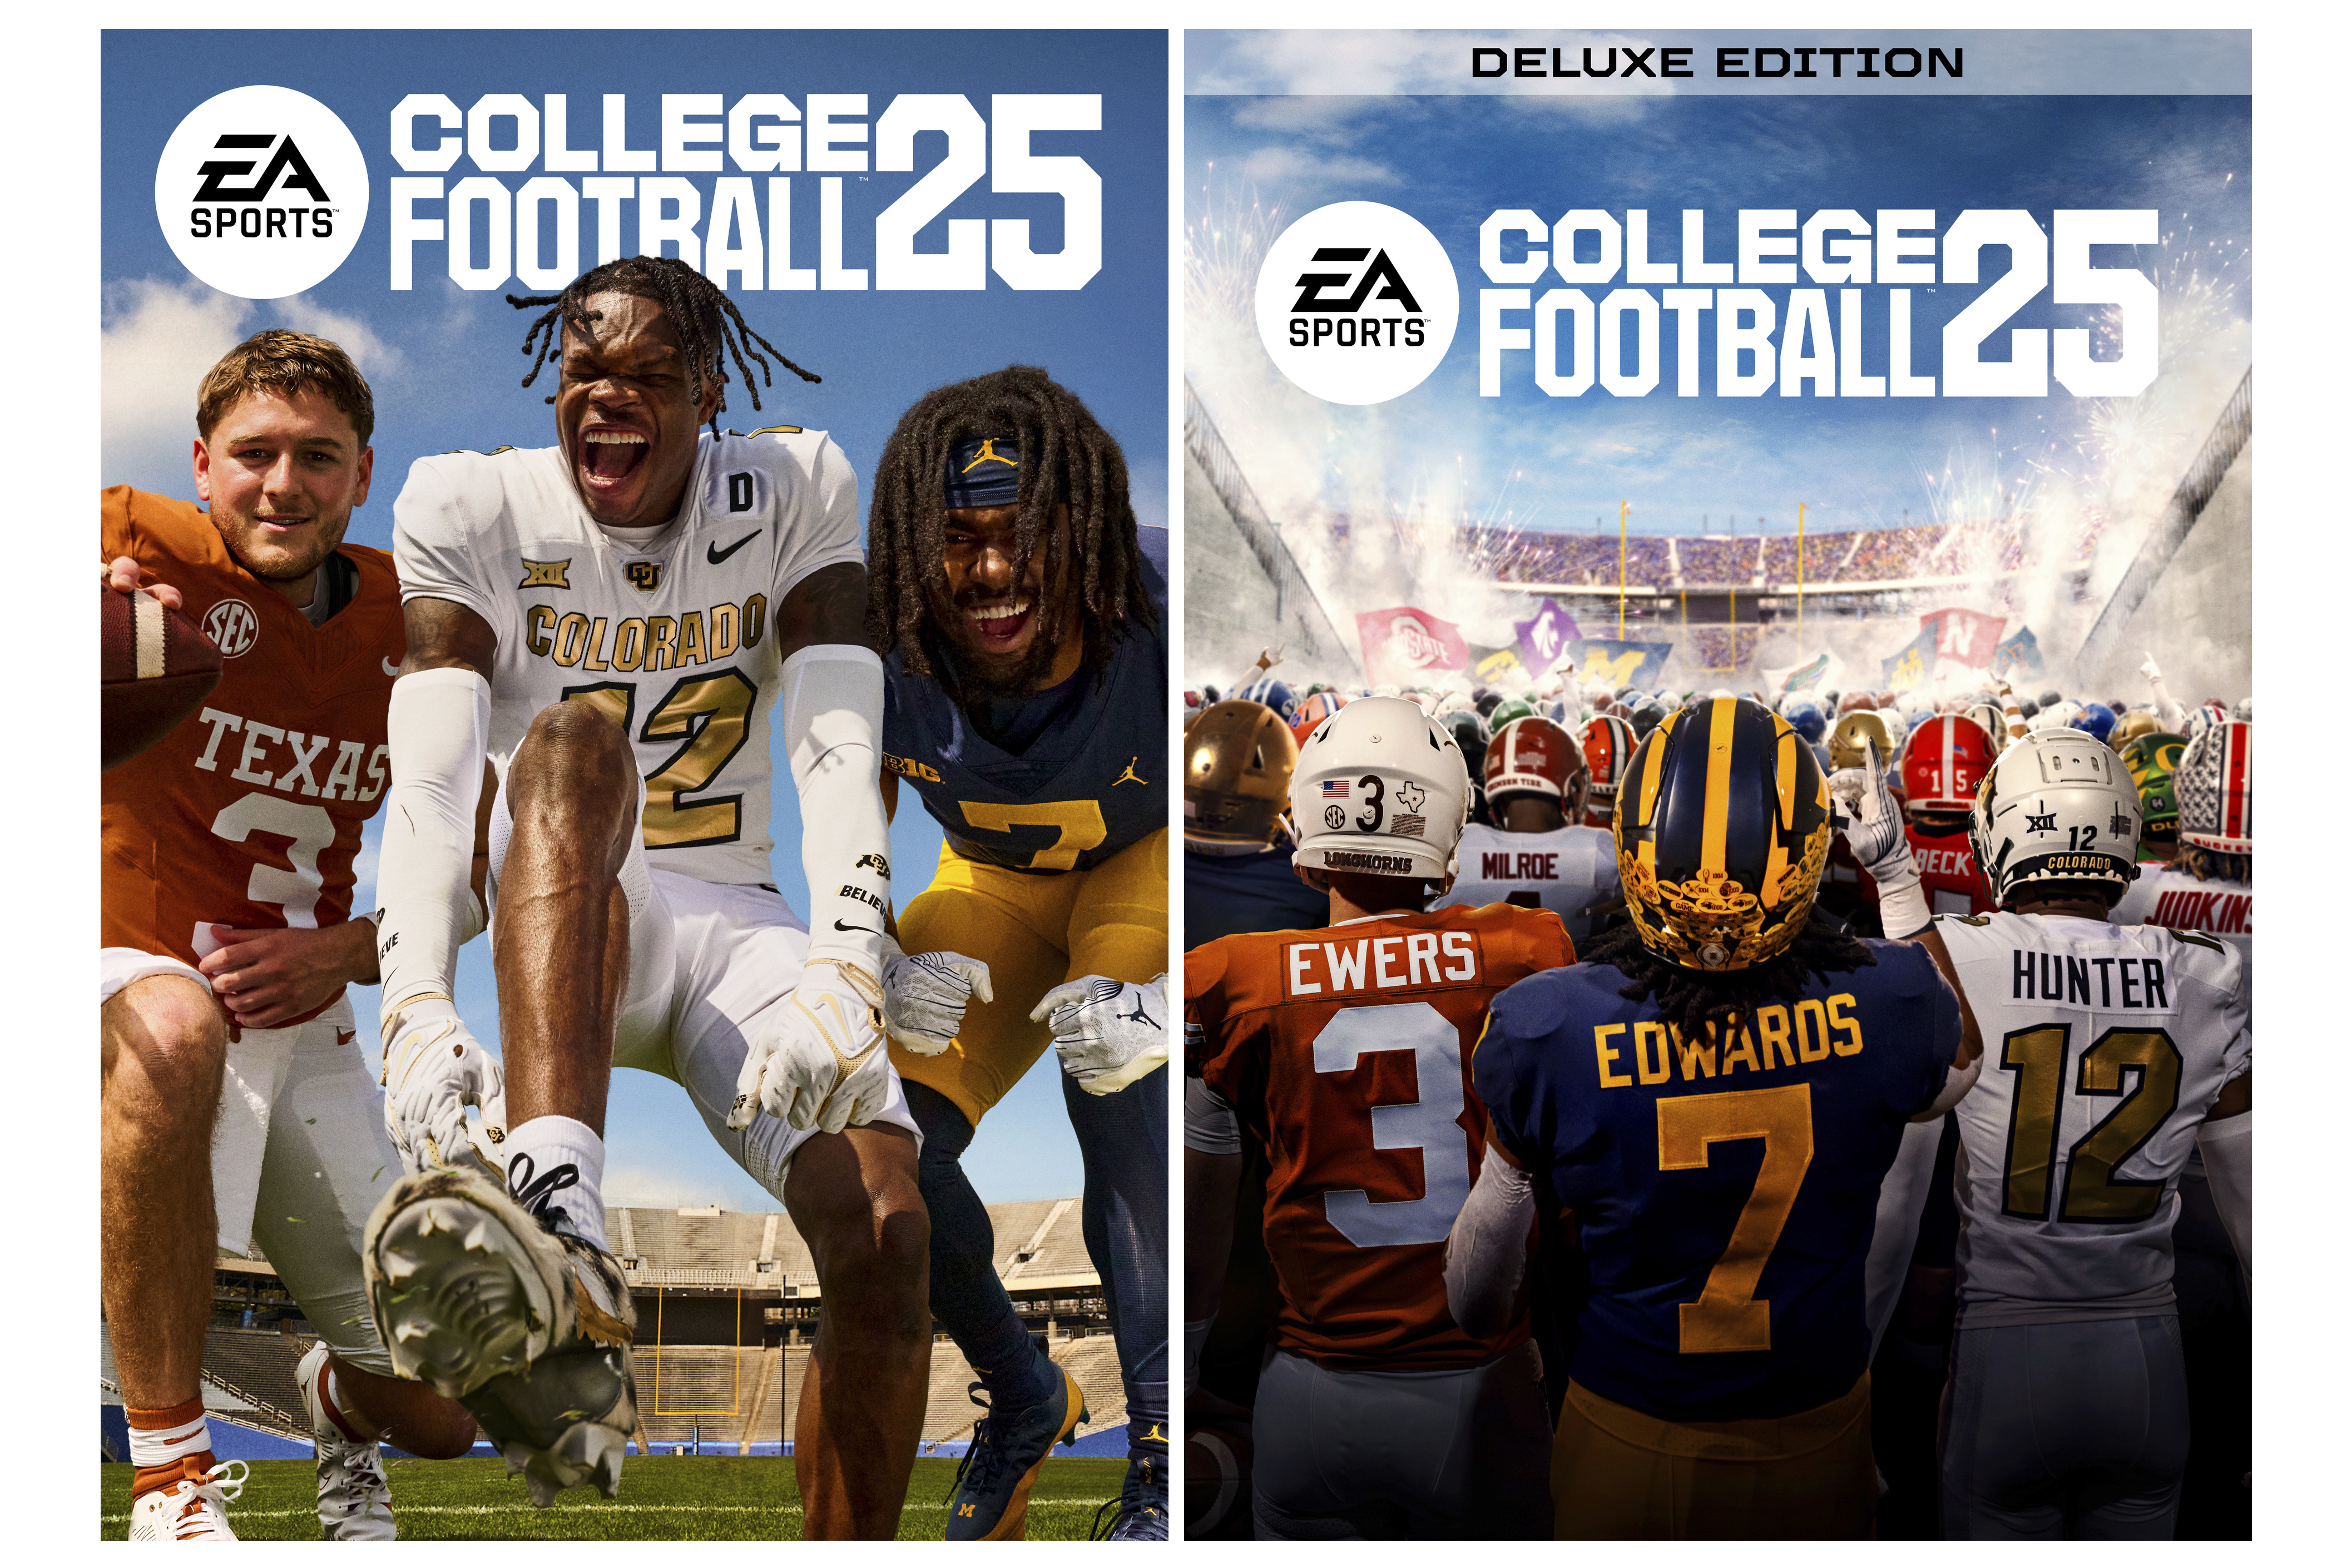 FILE - This combo of images provided by EA Sports, shows the video game covers for the new standard edition College Football 25, left, and Deluxe Edition College Football 25, featuring Texas' Quinn Ewers, Colorado's Travis Hunter, and Michigan's Donovan Edwards. EA Sports College Football 25, among the most highly anticipated sports video games of all time, has flooded the market as gamers who waited more than a decade for the franchise's next installment rush to play it. (EA Sports via AP, File)